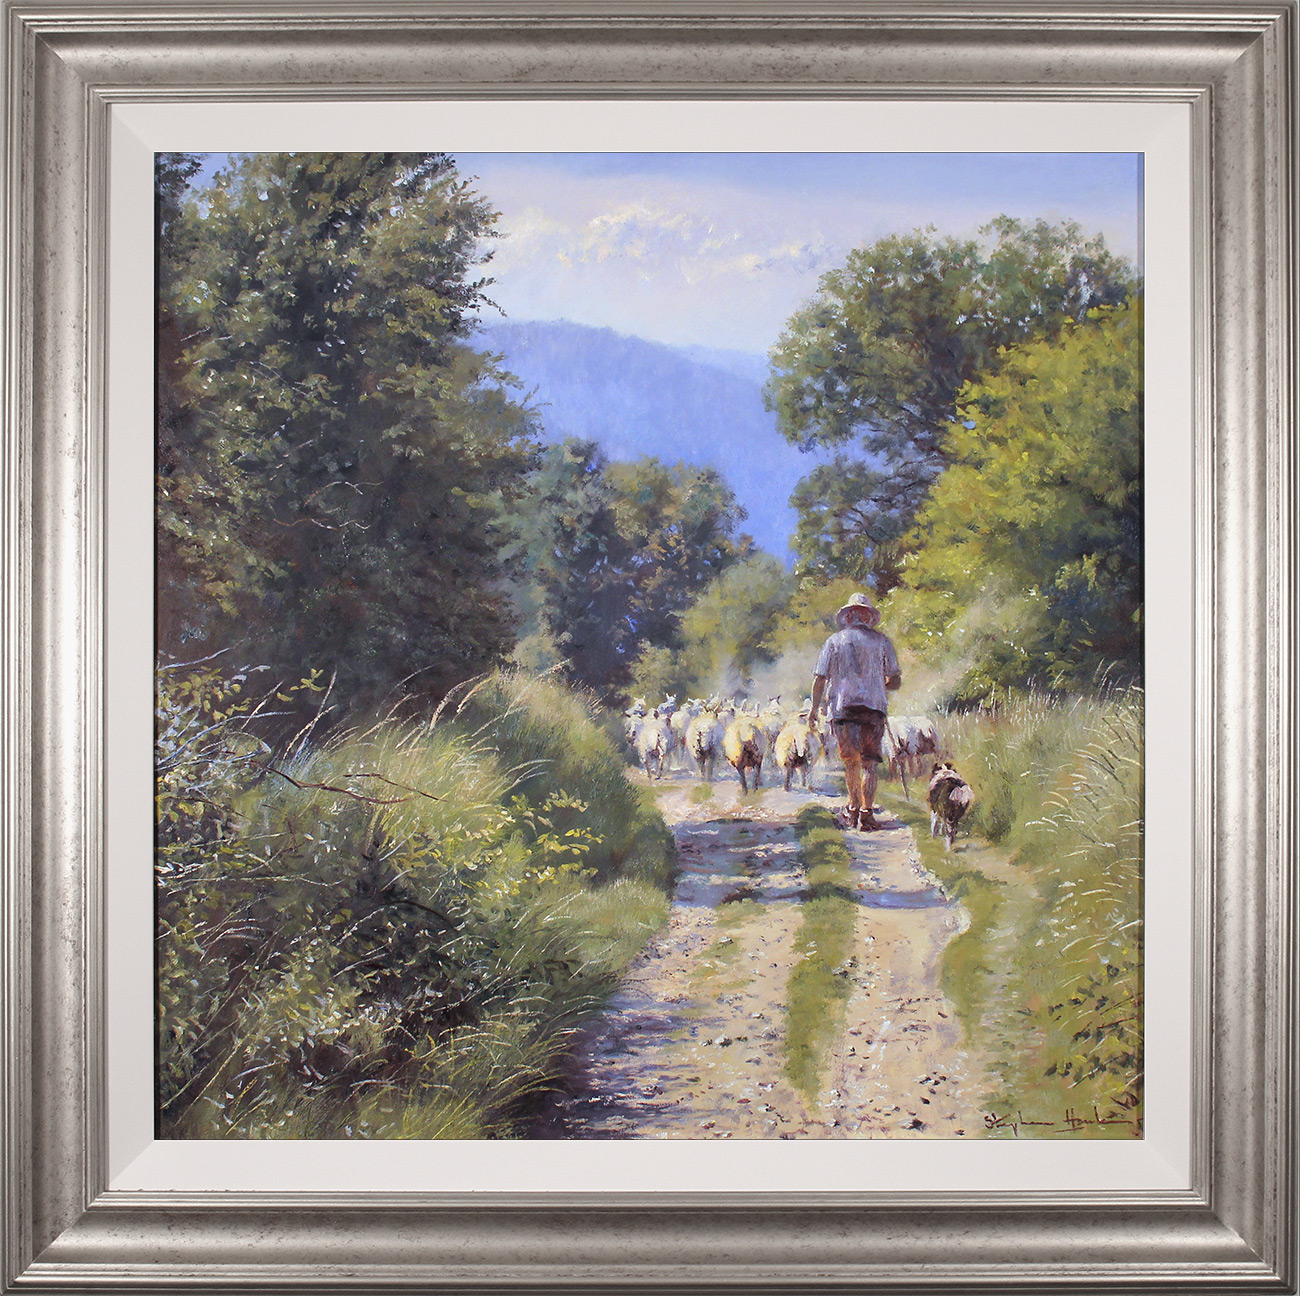 Stephen Hawkins, Original oil painting on canvas, The Summer Flock Click to enlarge